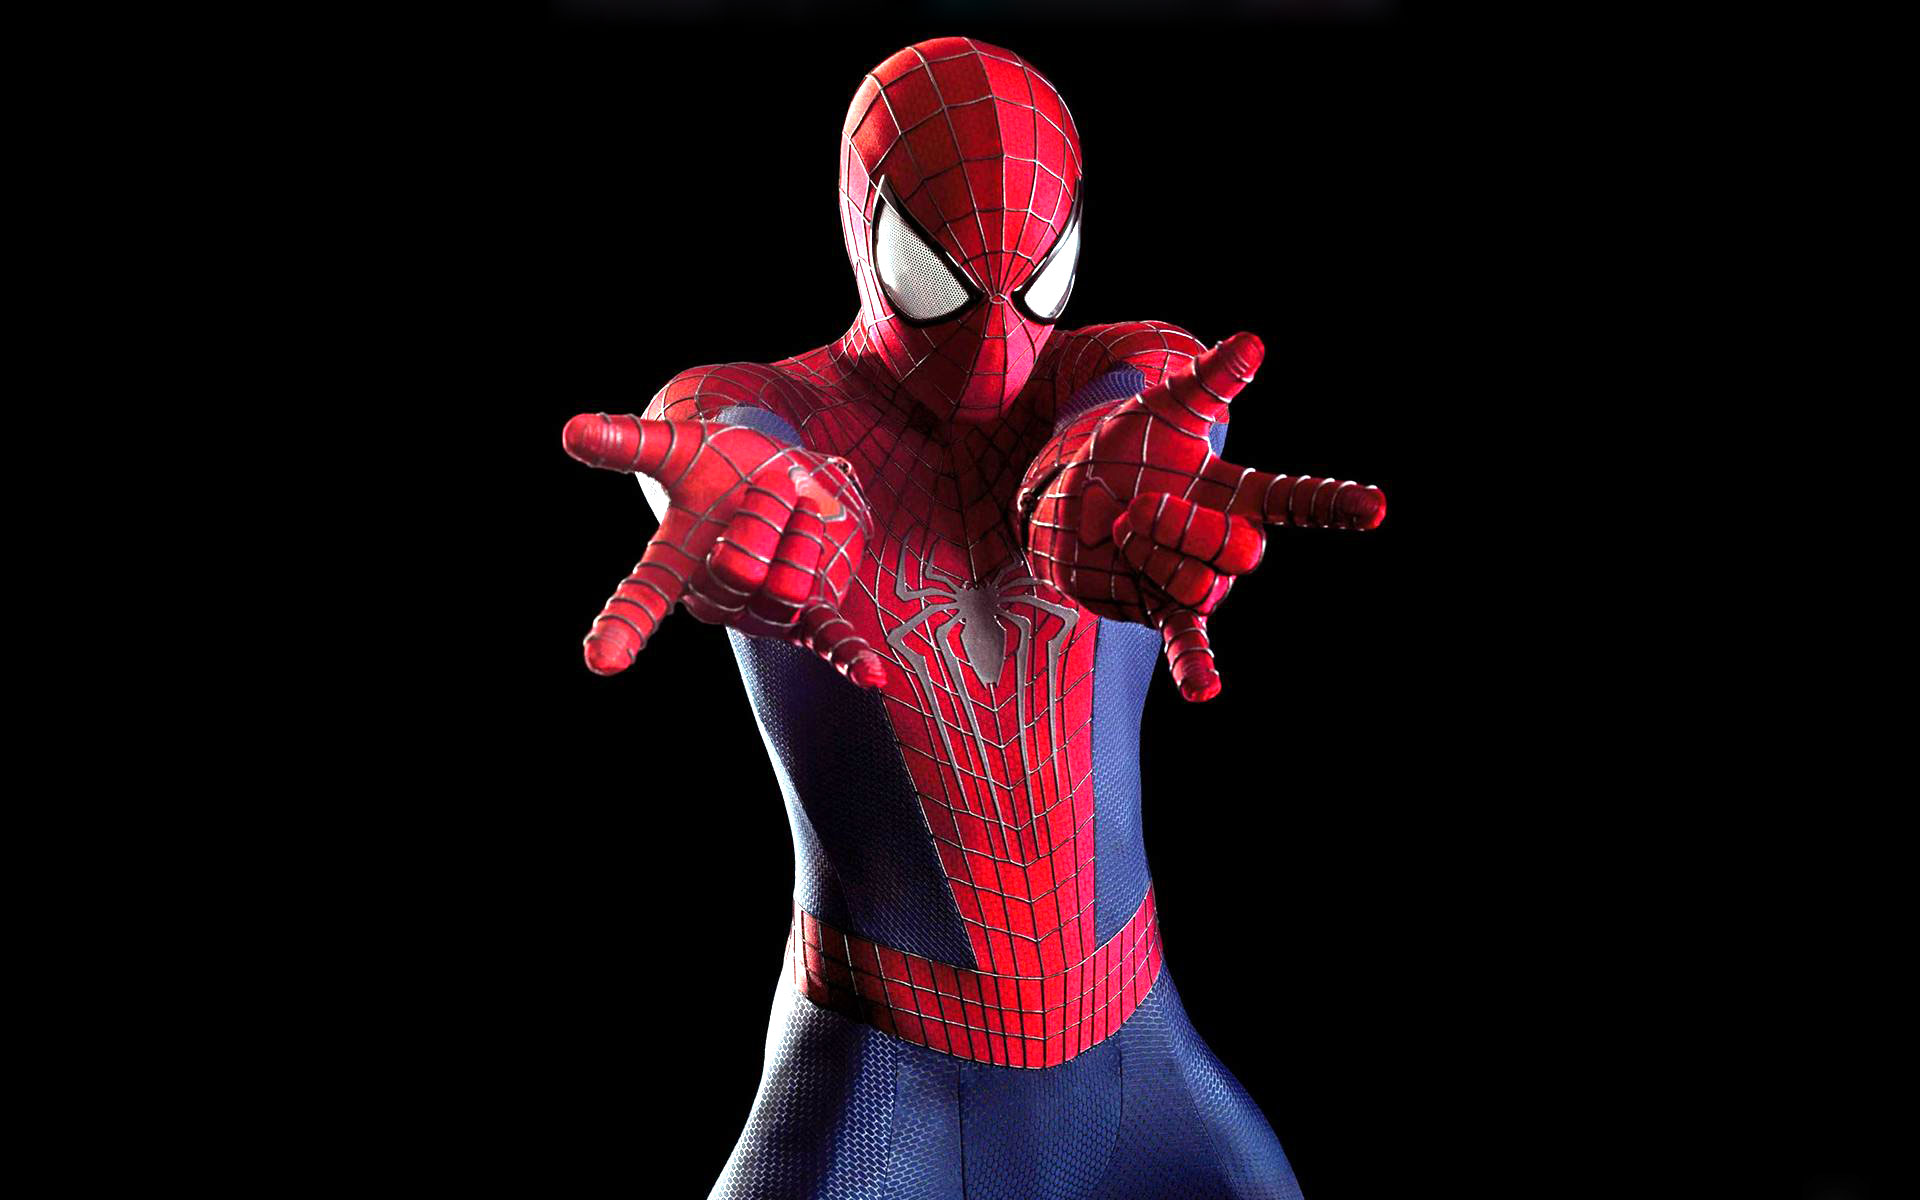 The Amazing Spider man 2 Wallpaper 8 to Choose From - Movie